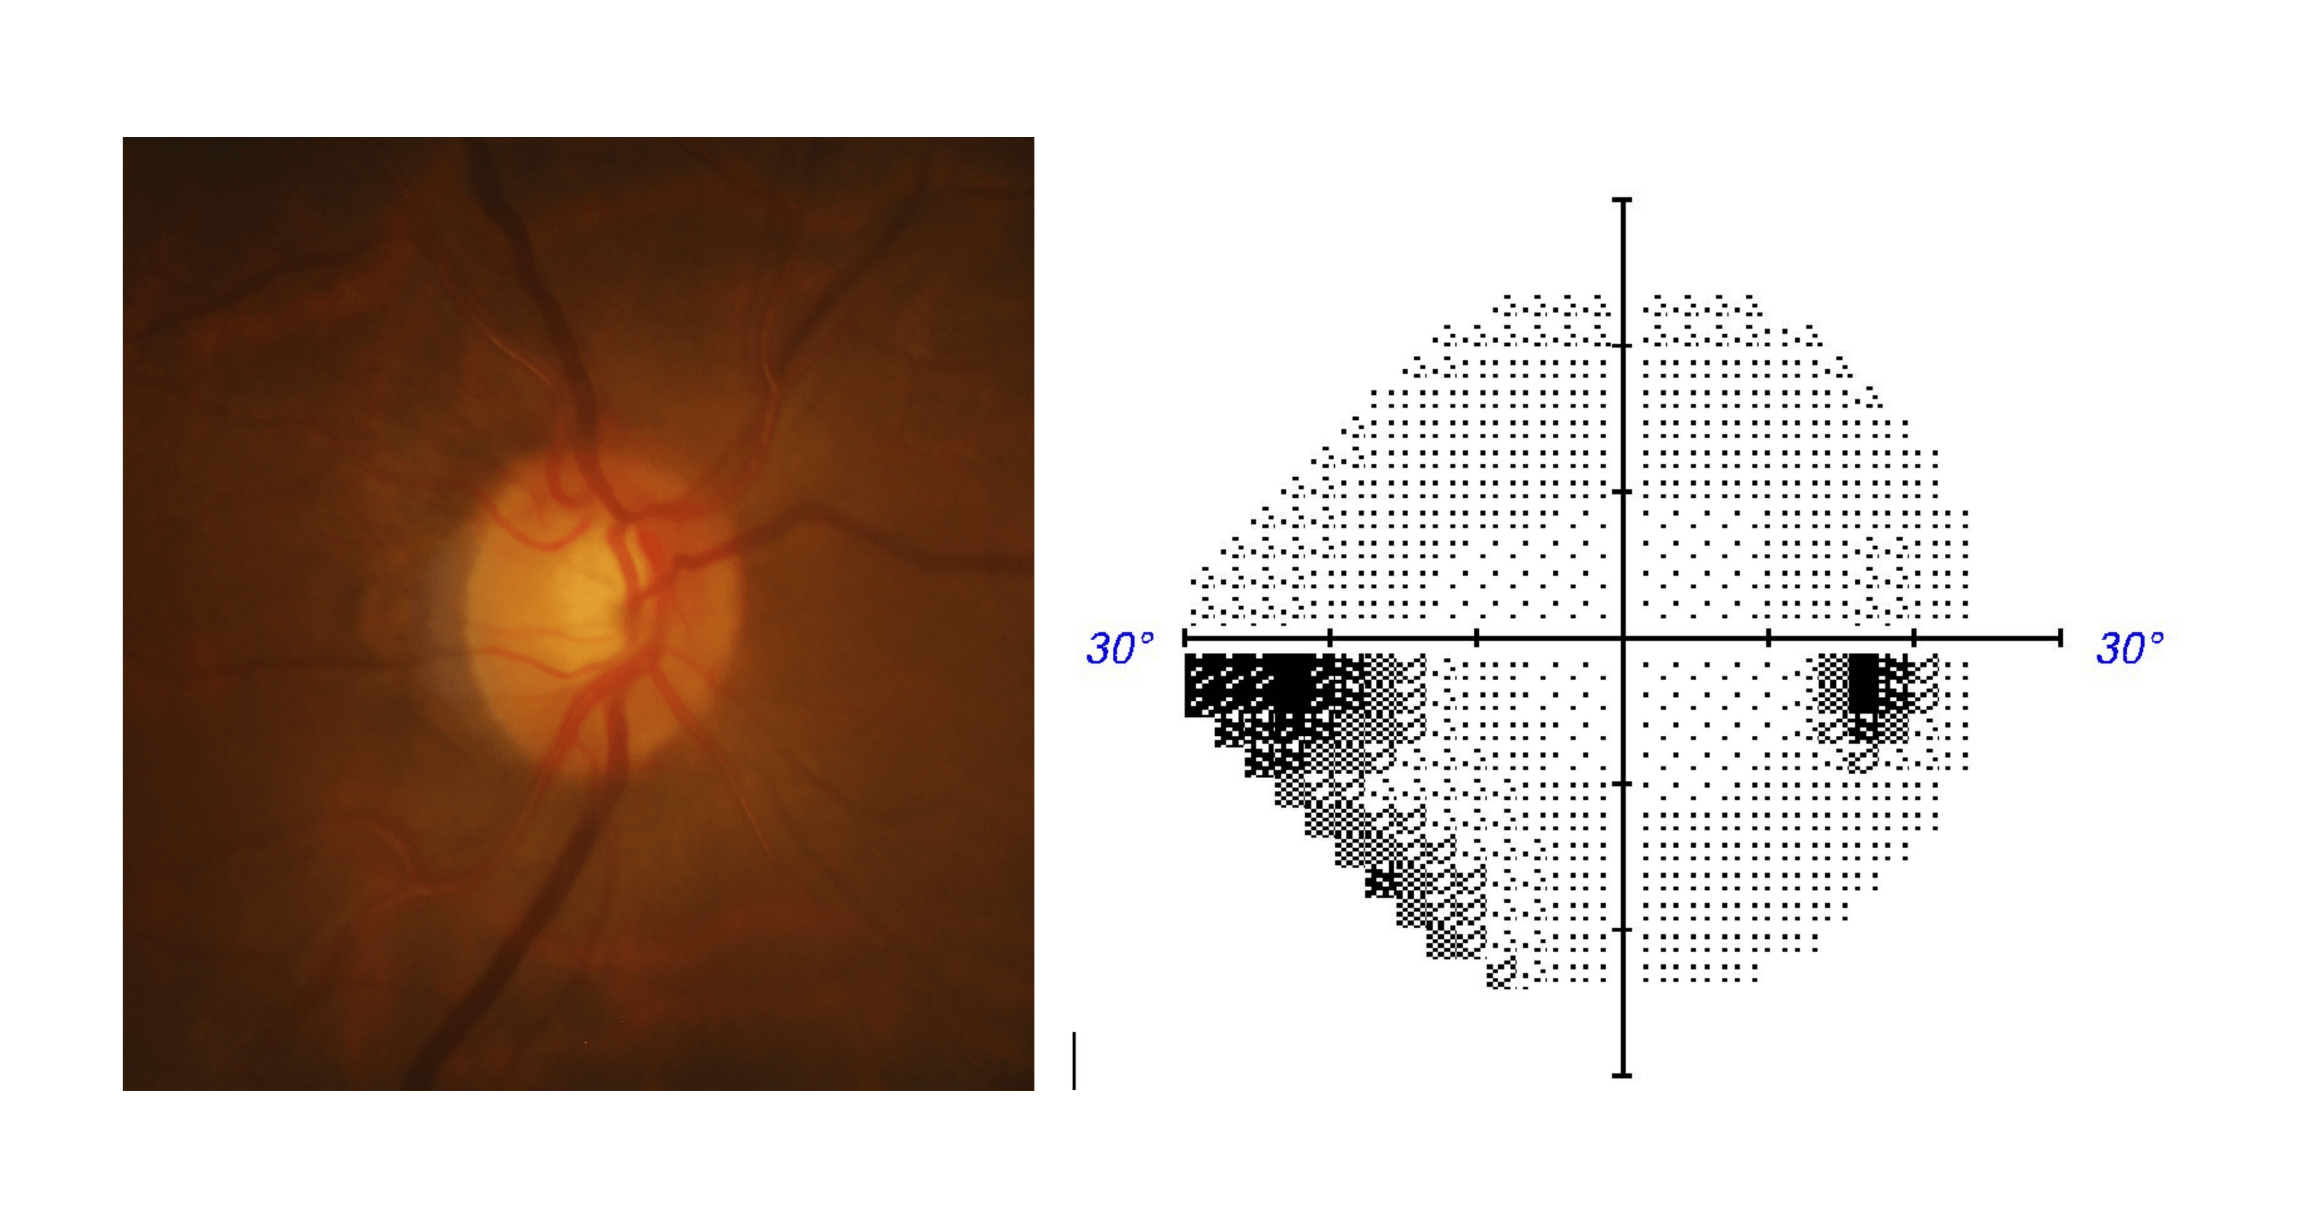 Optic disc photo and visual field test results for an eye with early stage glacuoma